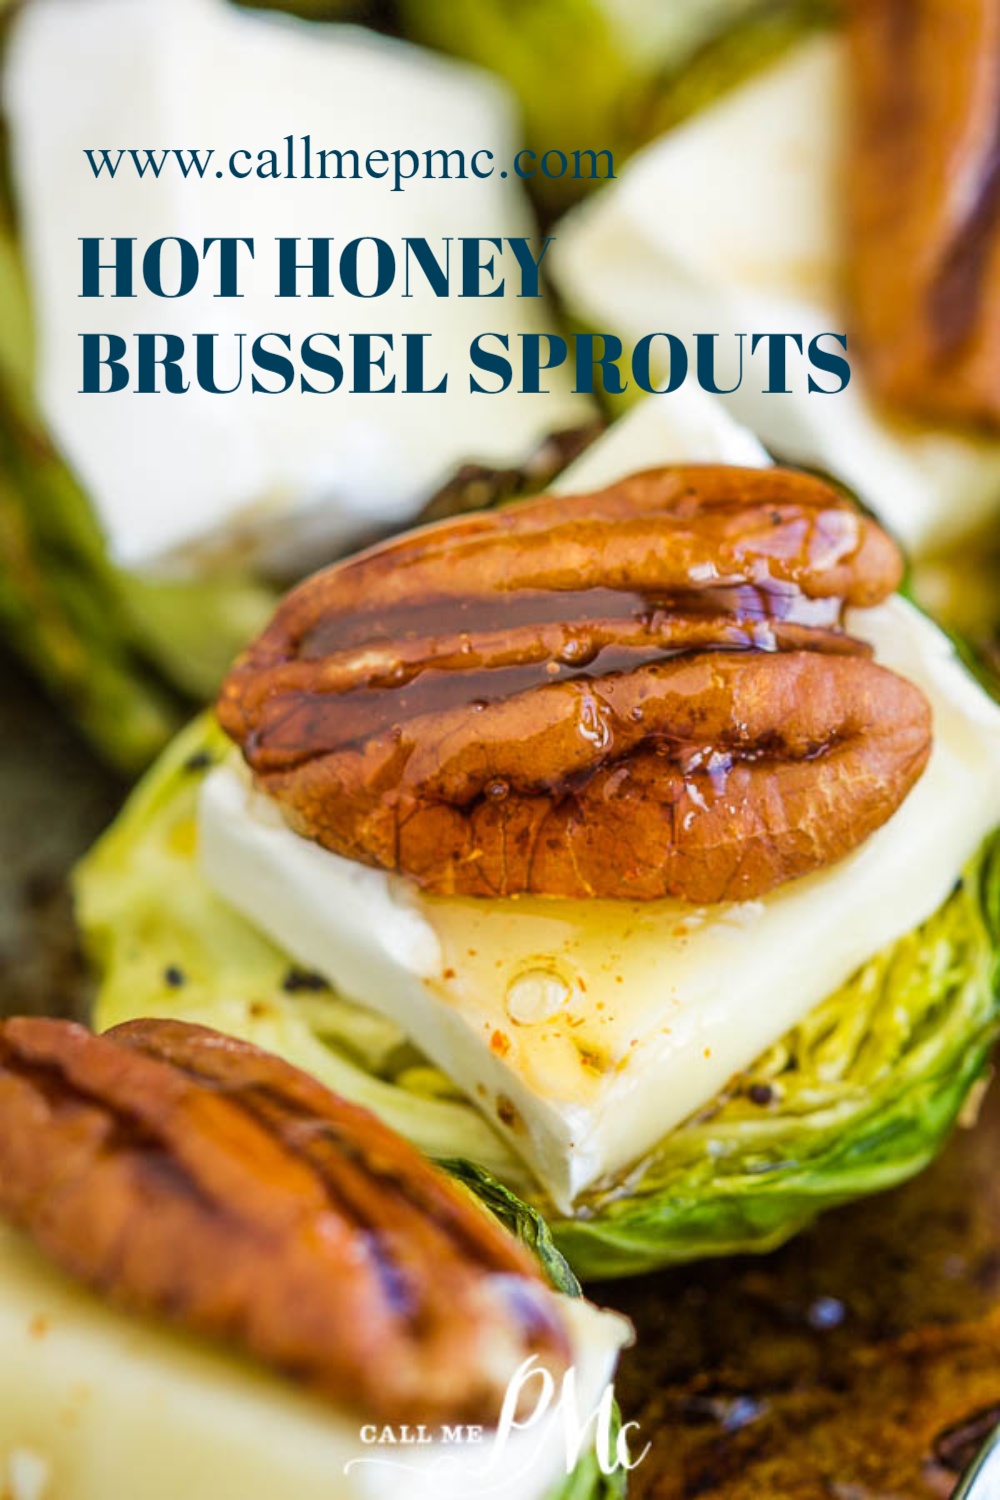  Roasted Brussel sprouts with brie cheese, pecans, & hot honey